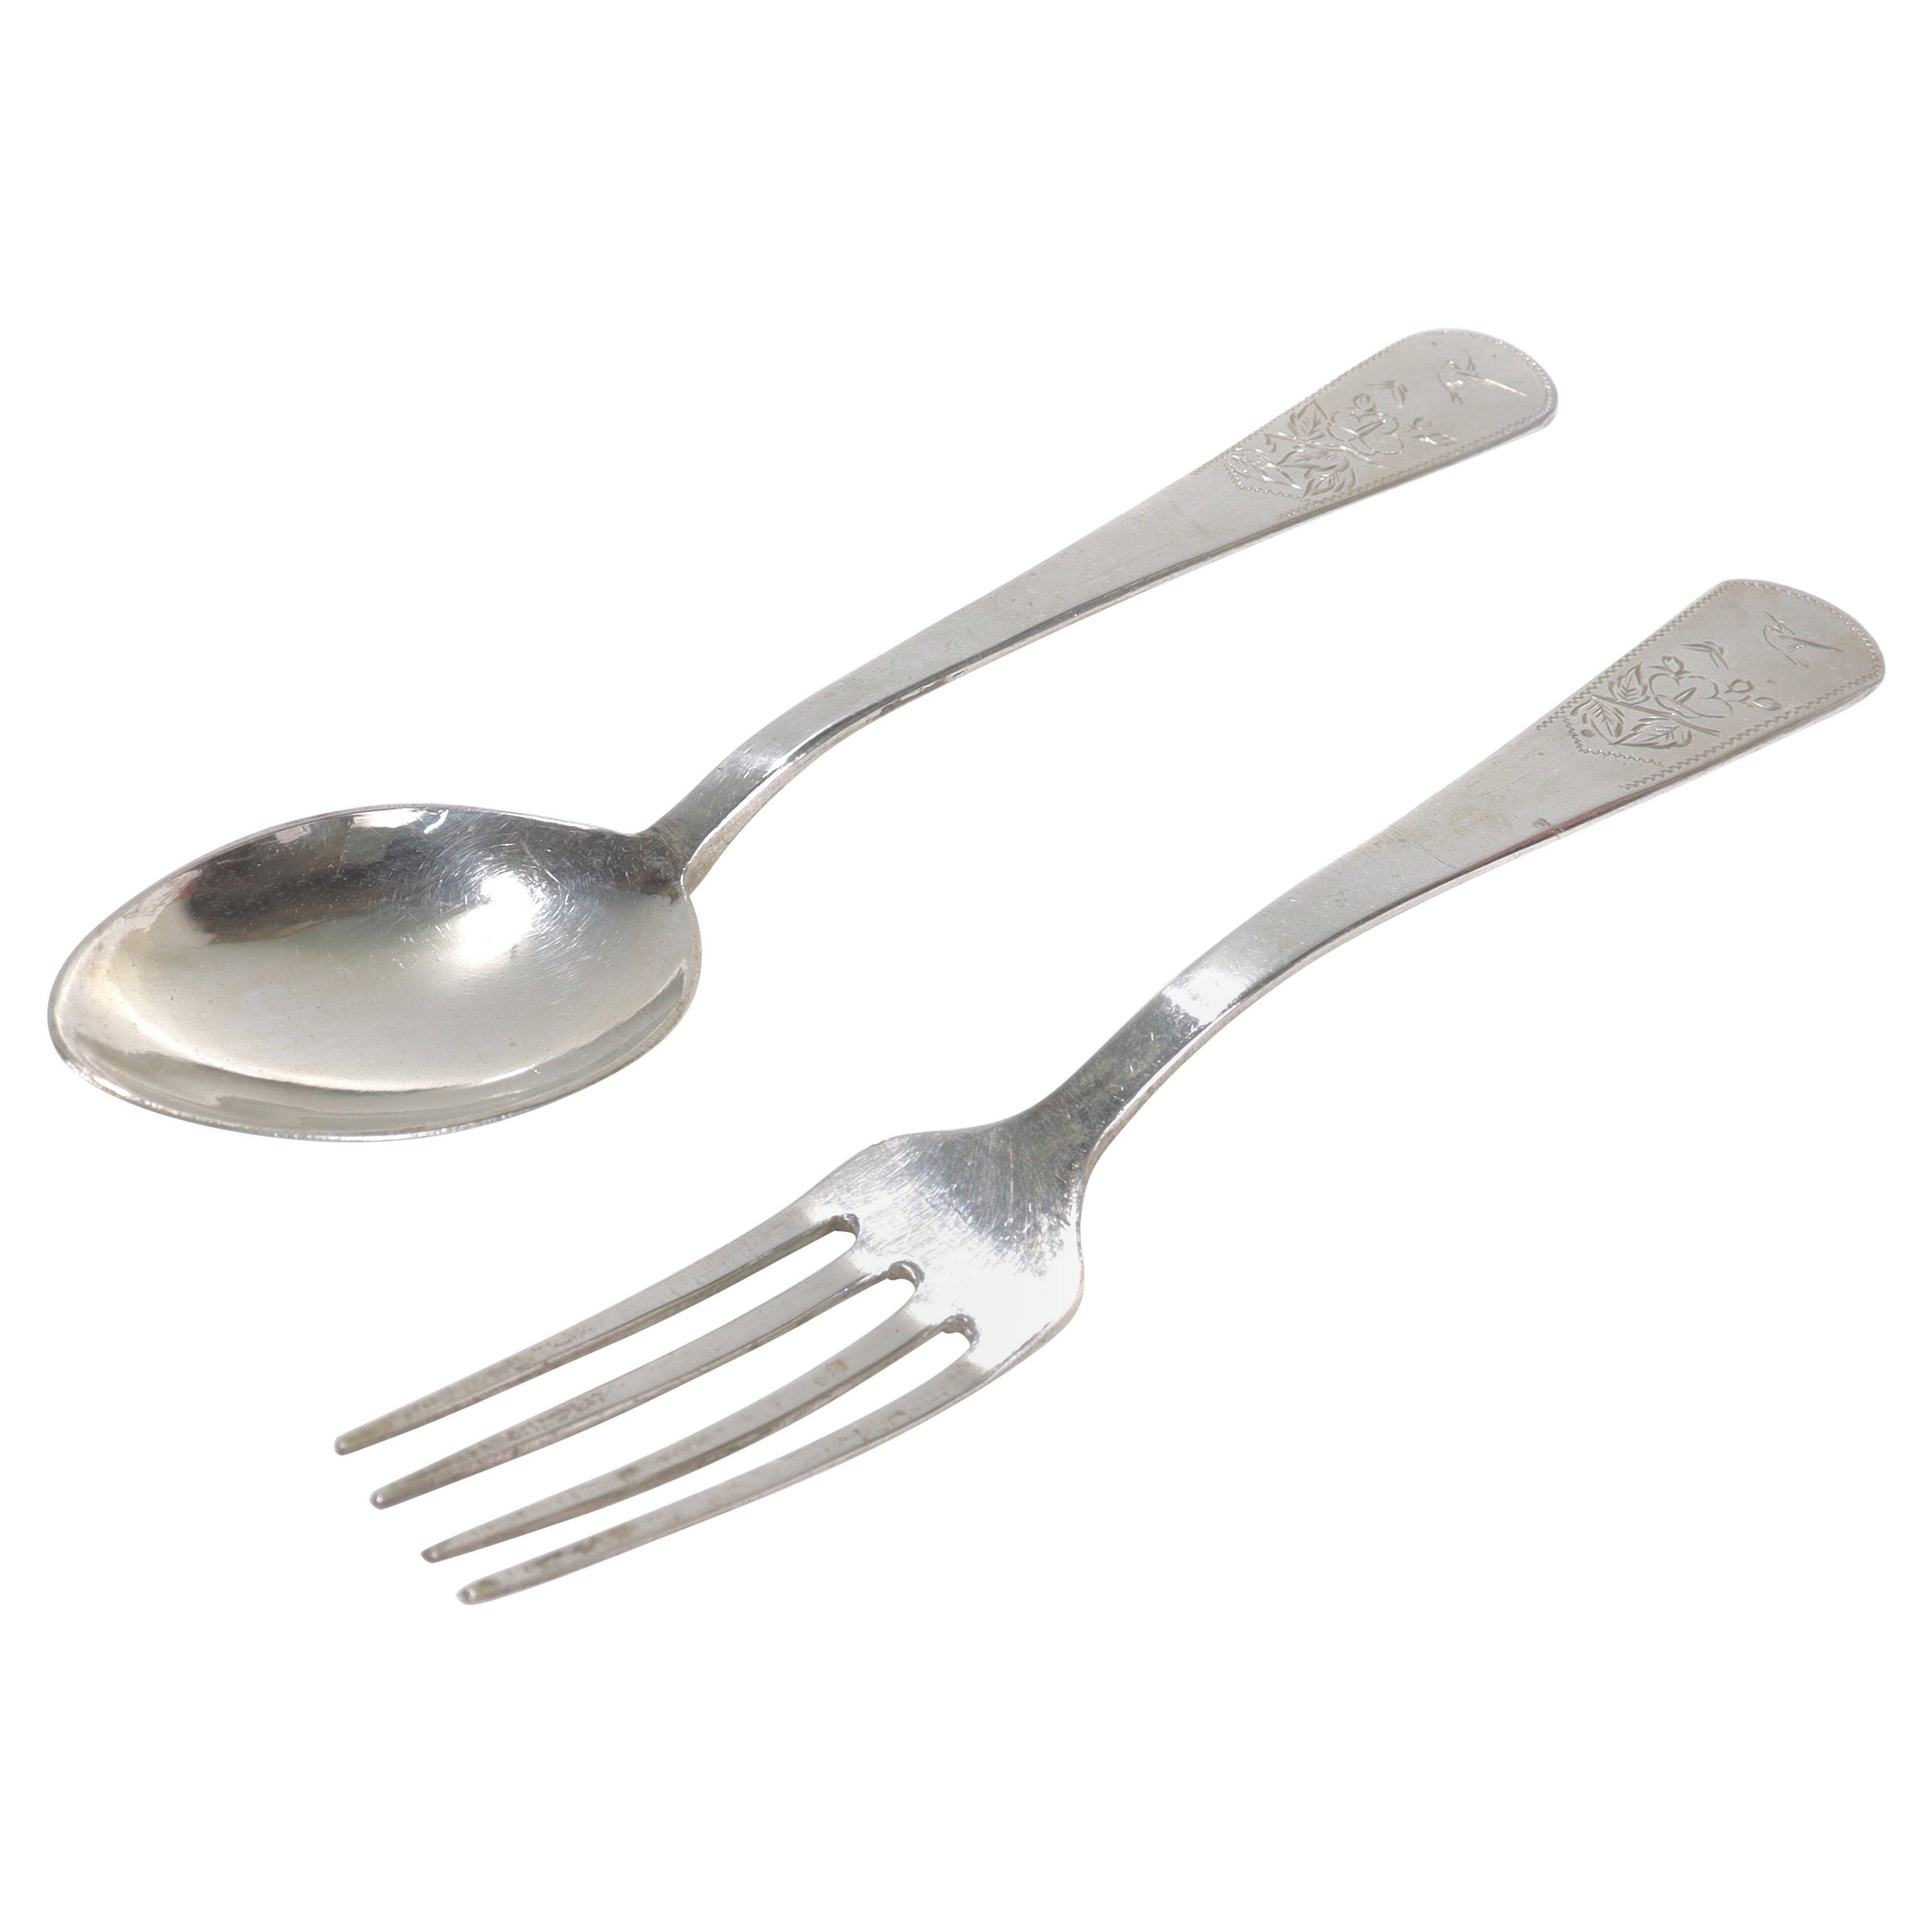 Old or Antique Chinese Export Silver Fork and Spoon For Sale at 1stDibs |  spoon and fork in chinese, antique spoon and fork, fork and spoon in chinese